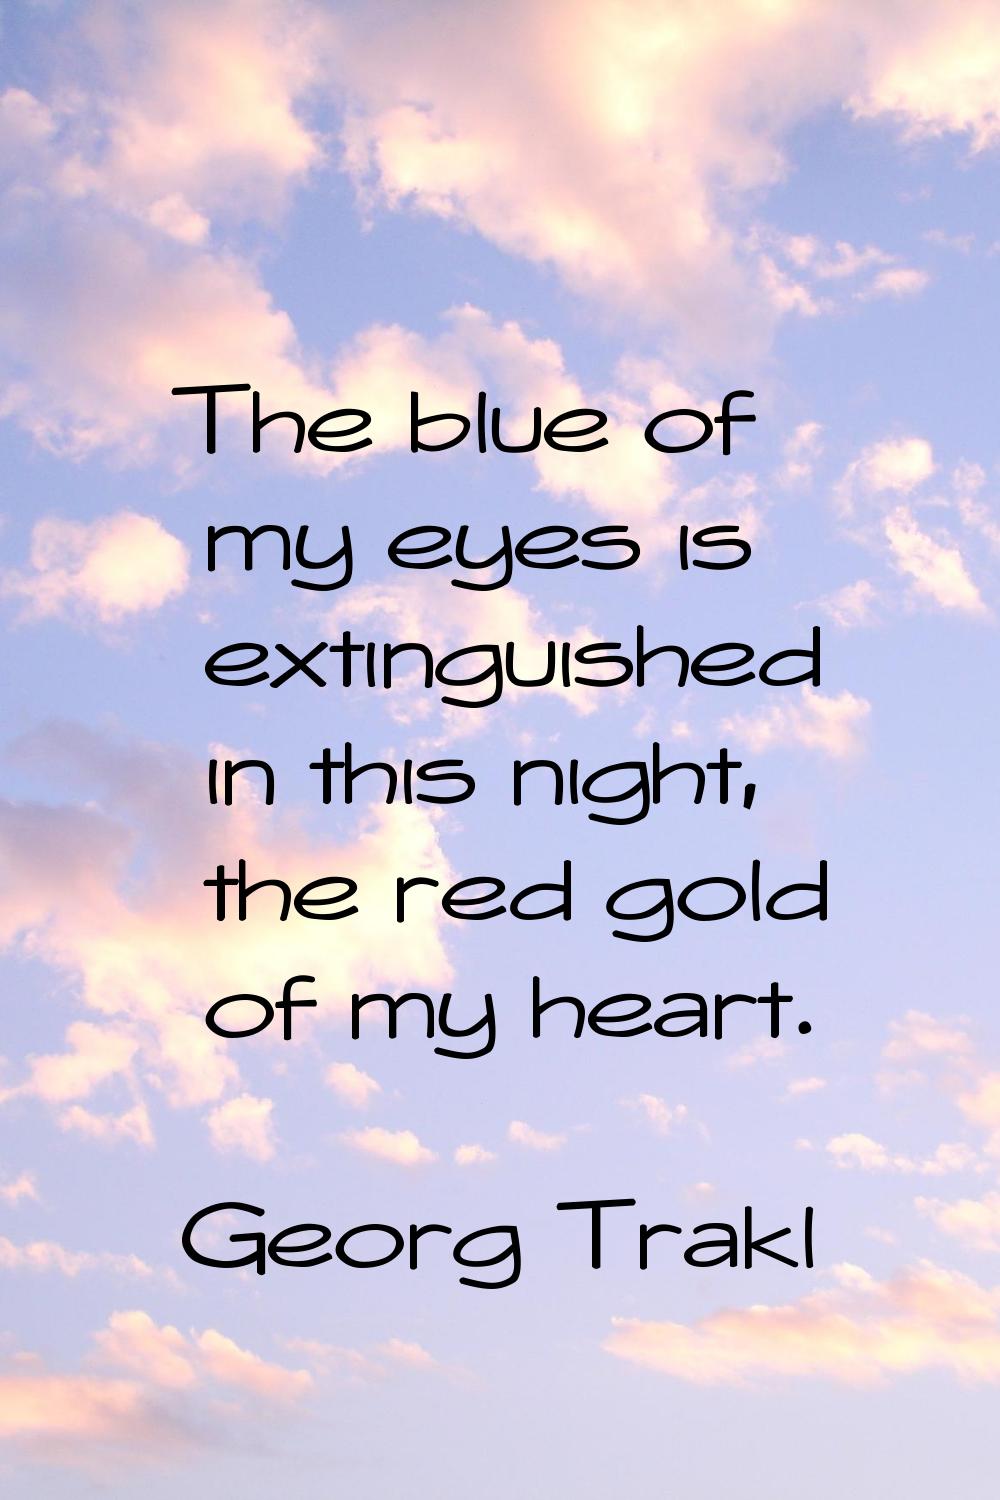 The blue of my eyes is extinguished in this night, the red gold of my heart.